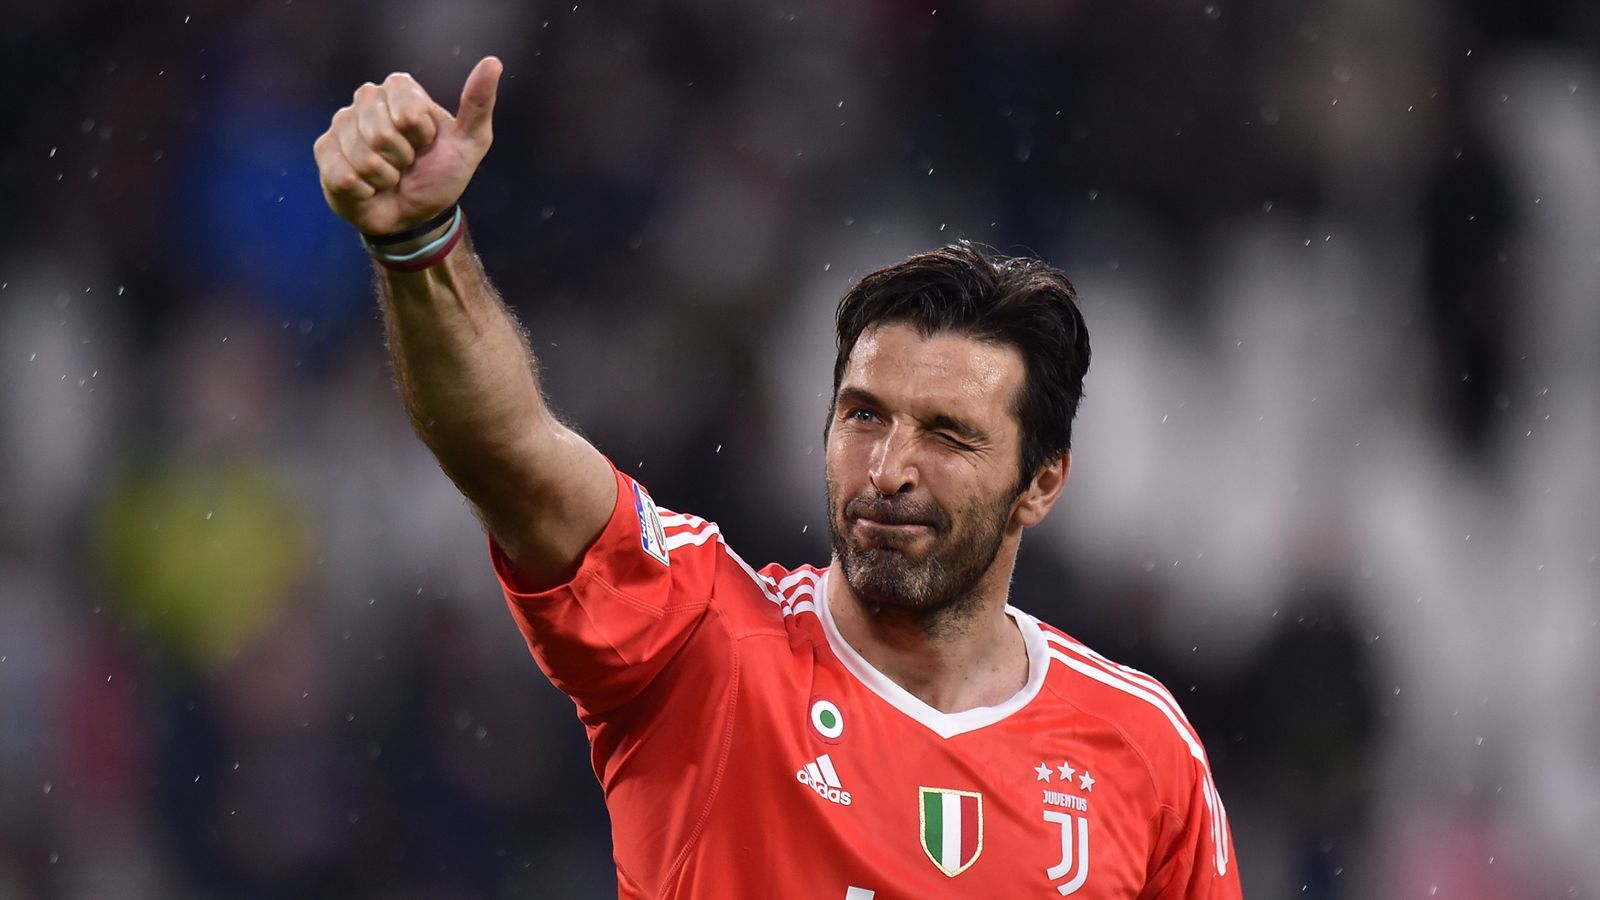 Buffon Talks about Playing for Success Compared to Playing for Fun